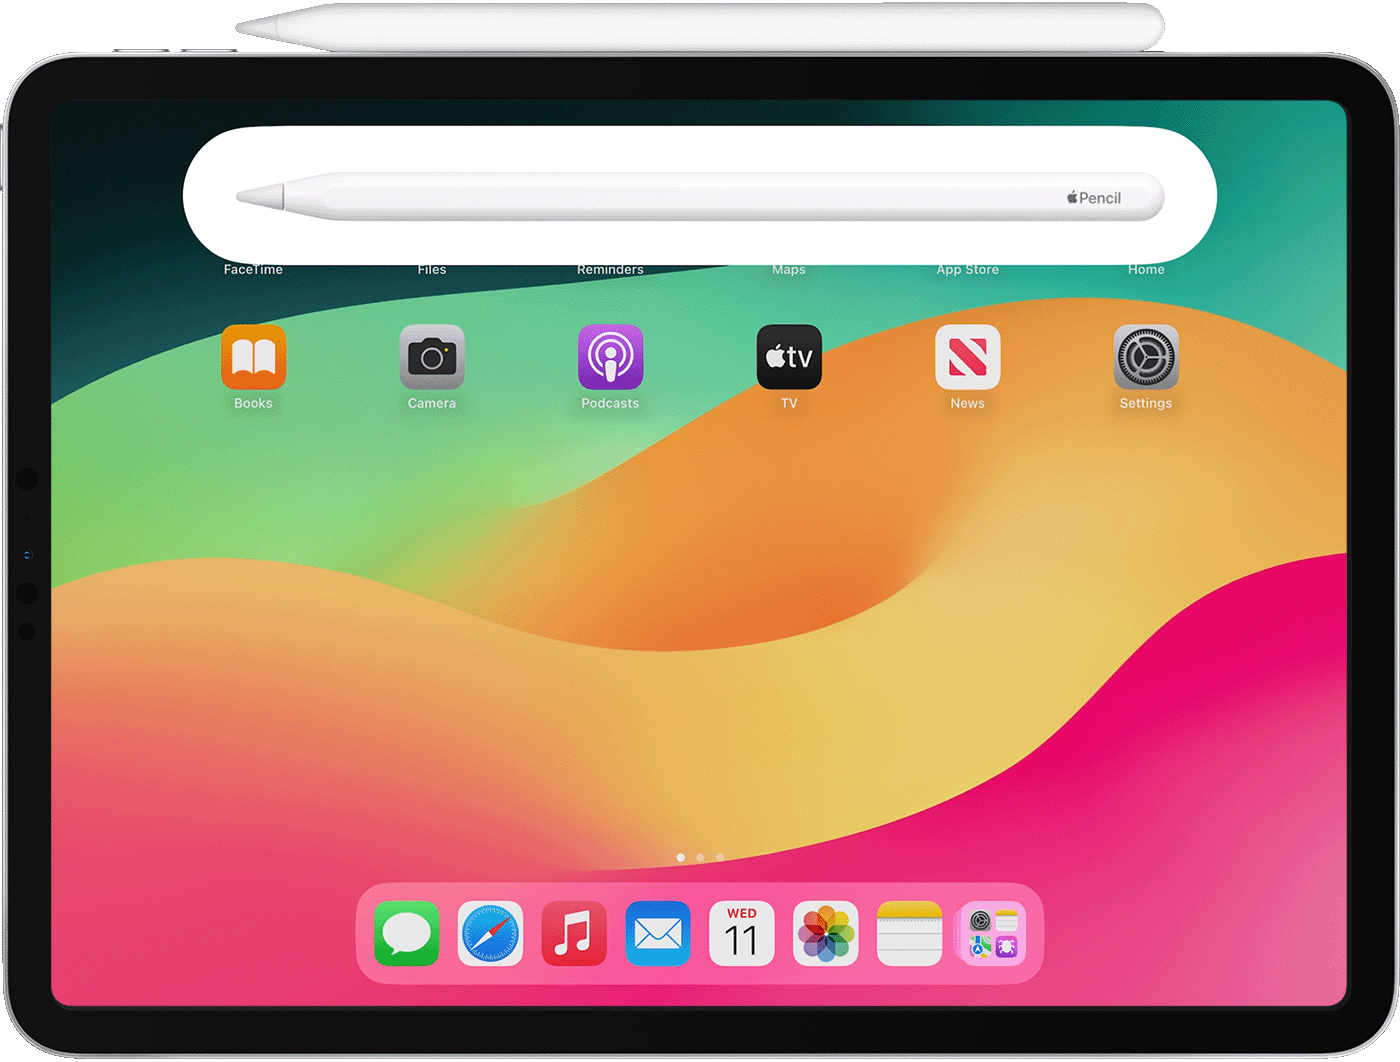 Pair Apple Pencil with your iPad - Apple Support (HK)